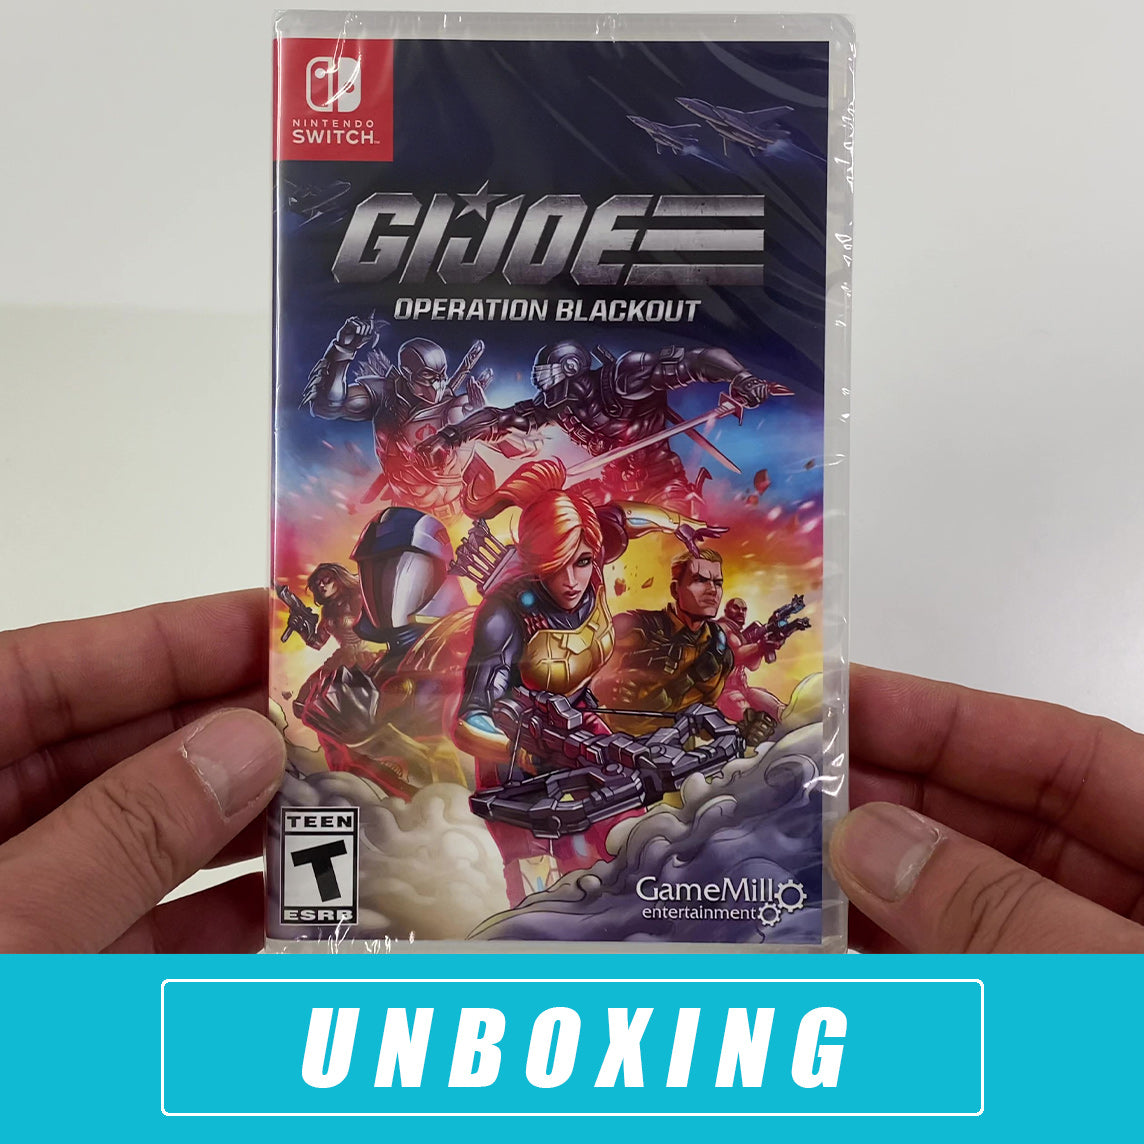 GI Joe Operation Blackout - (NSW) Nintendo Switch [UNBOXING] Video Games Game Mill   